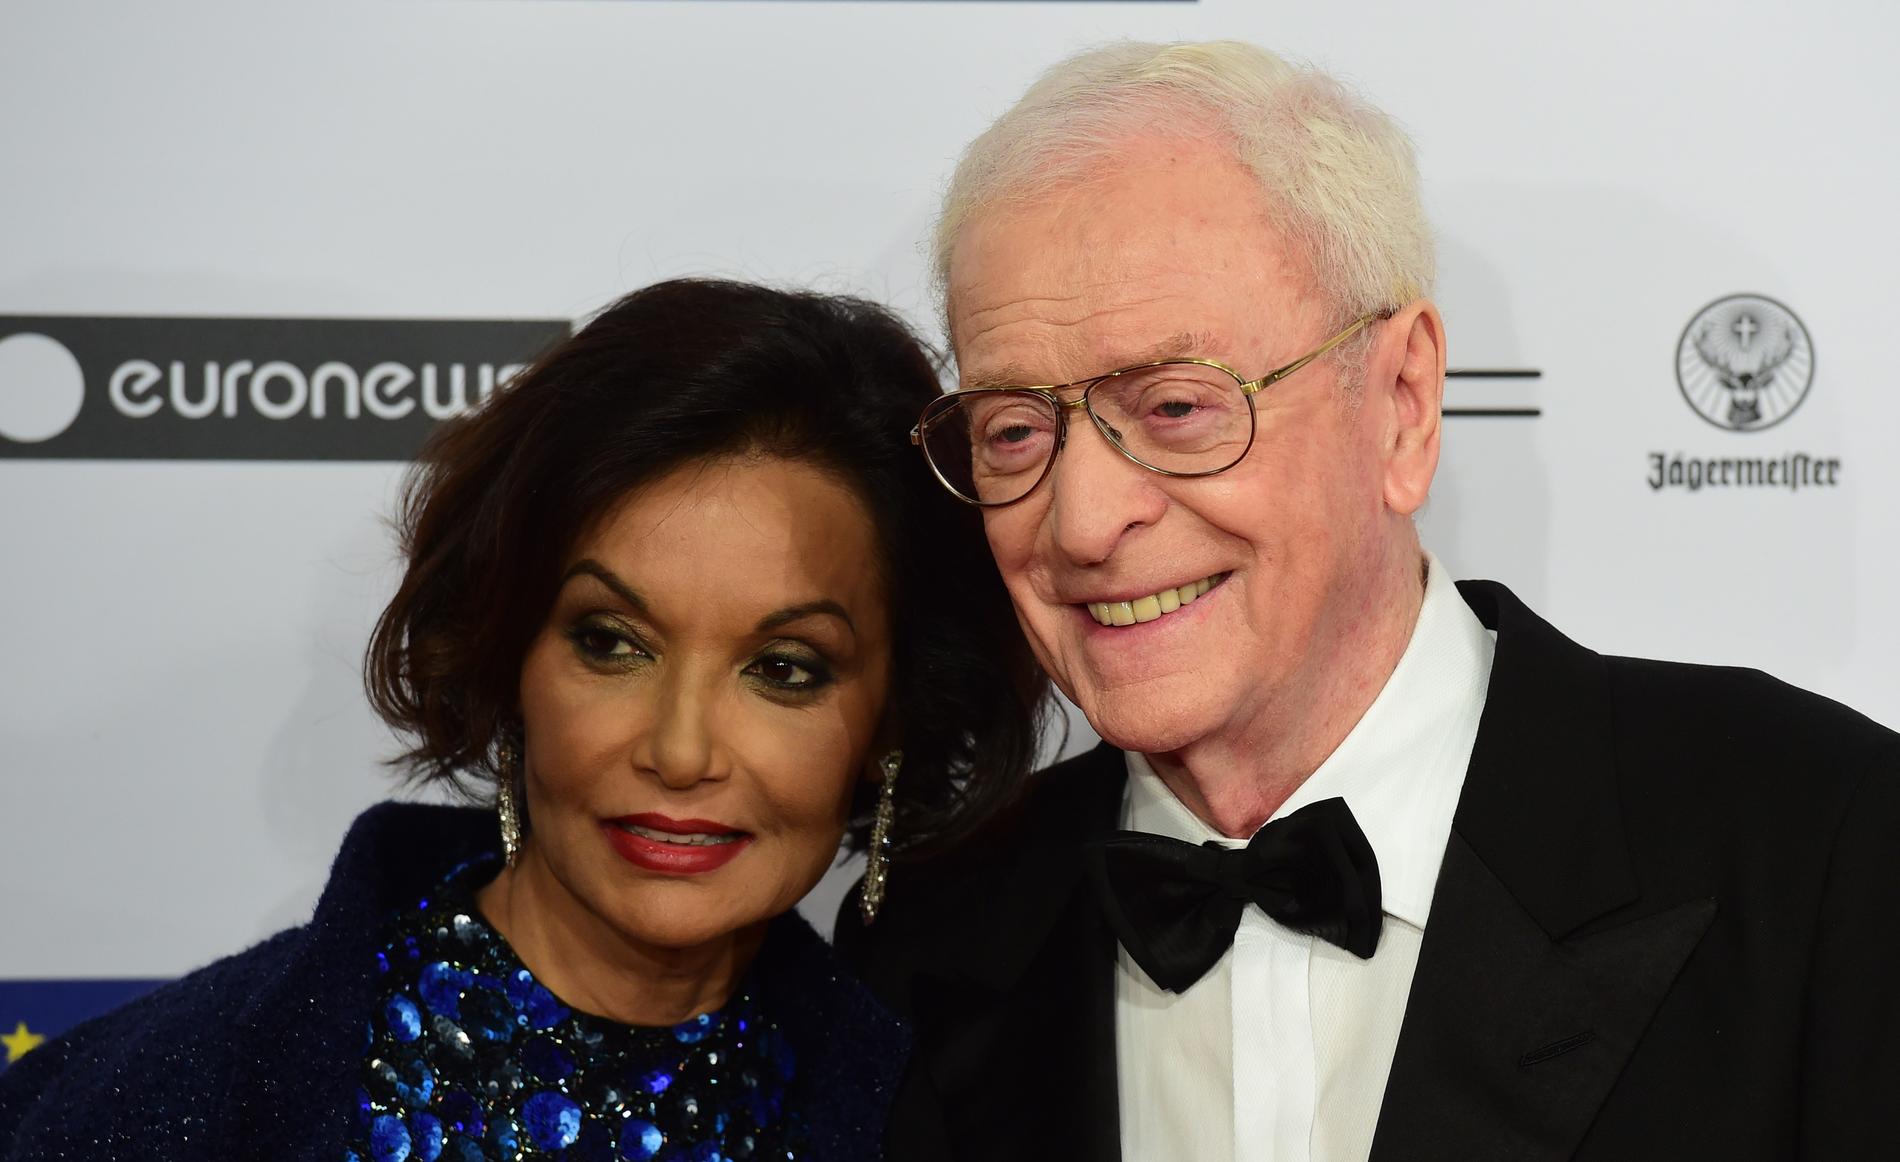 Wife: Sir Michael Caine and his wife Shakira (76 years old) have been married since 1973